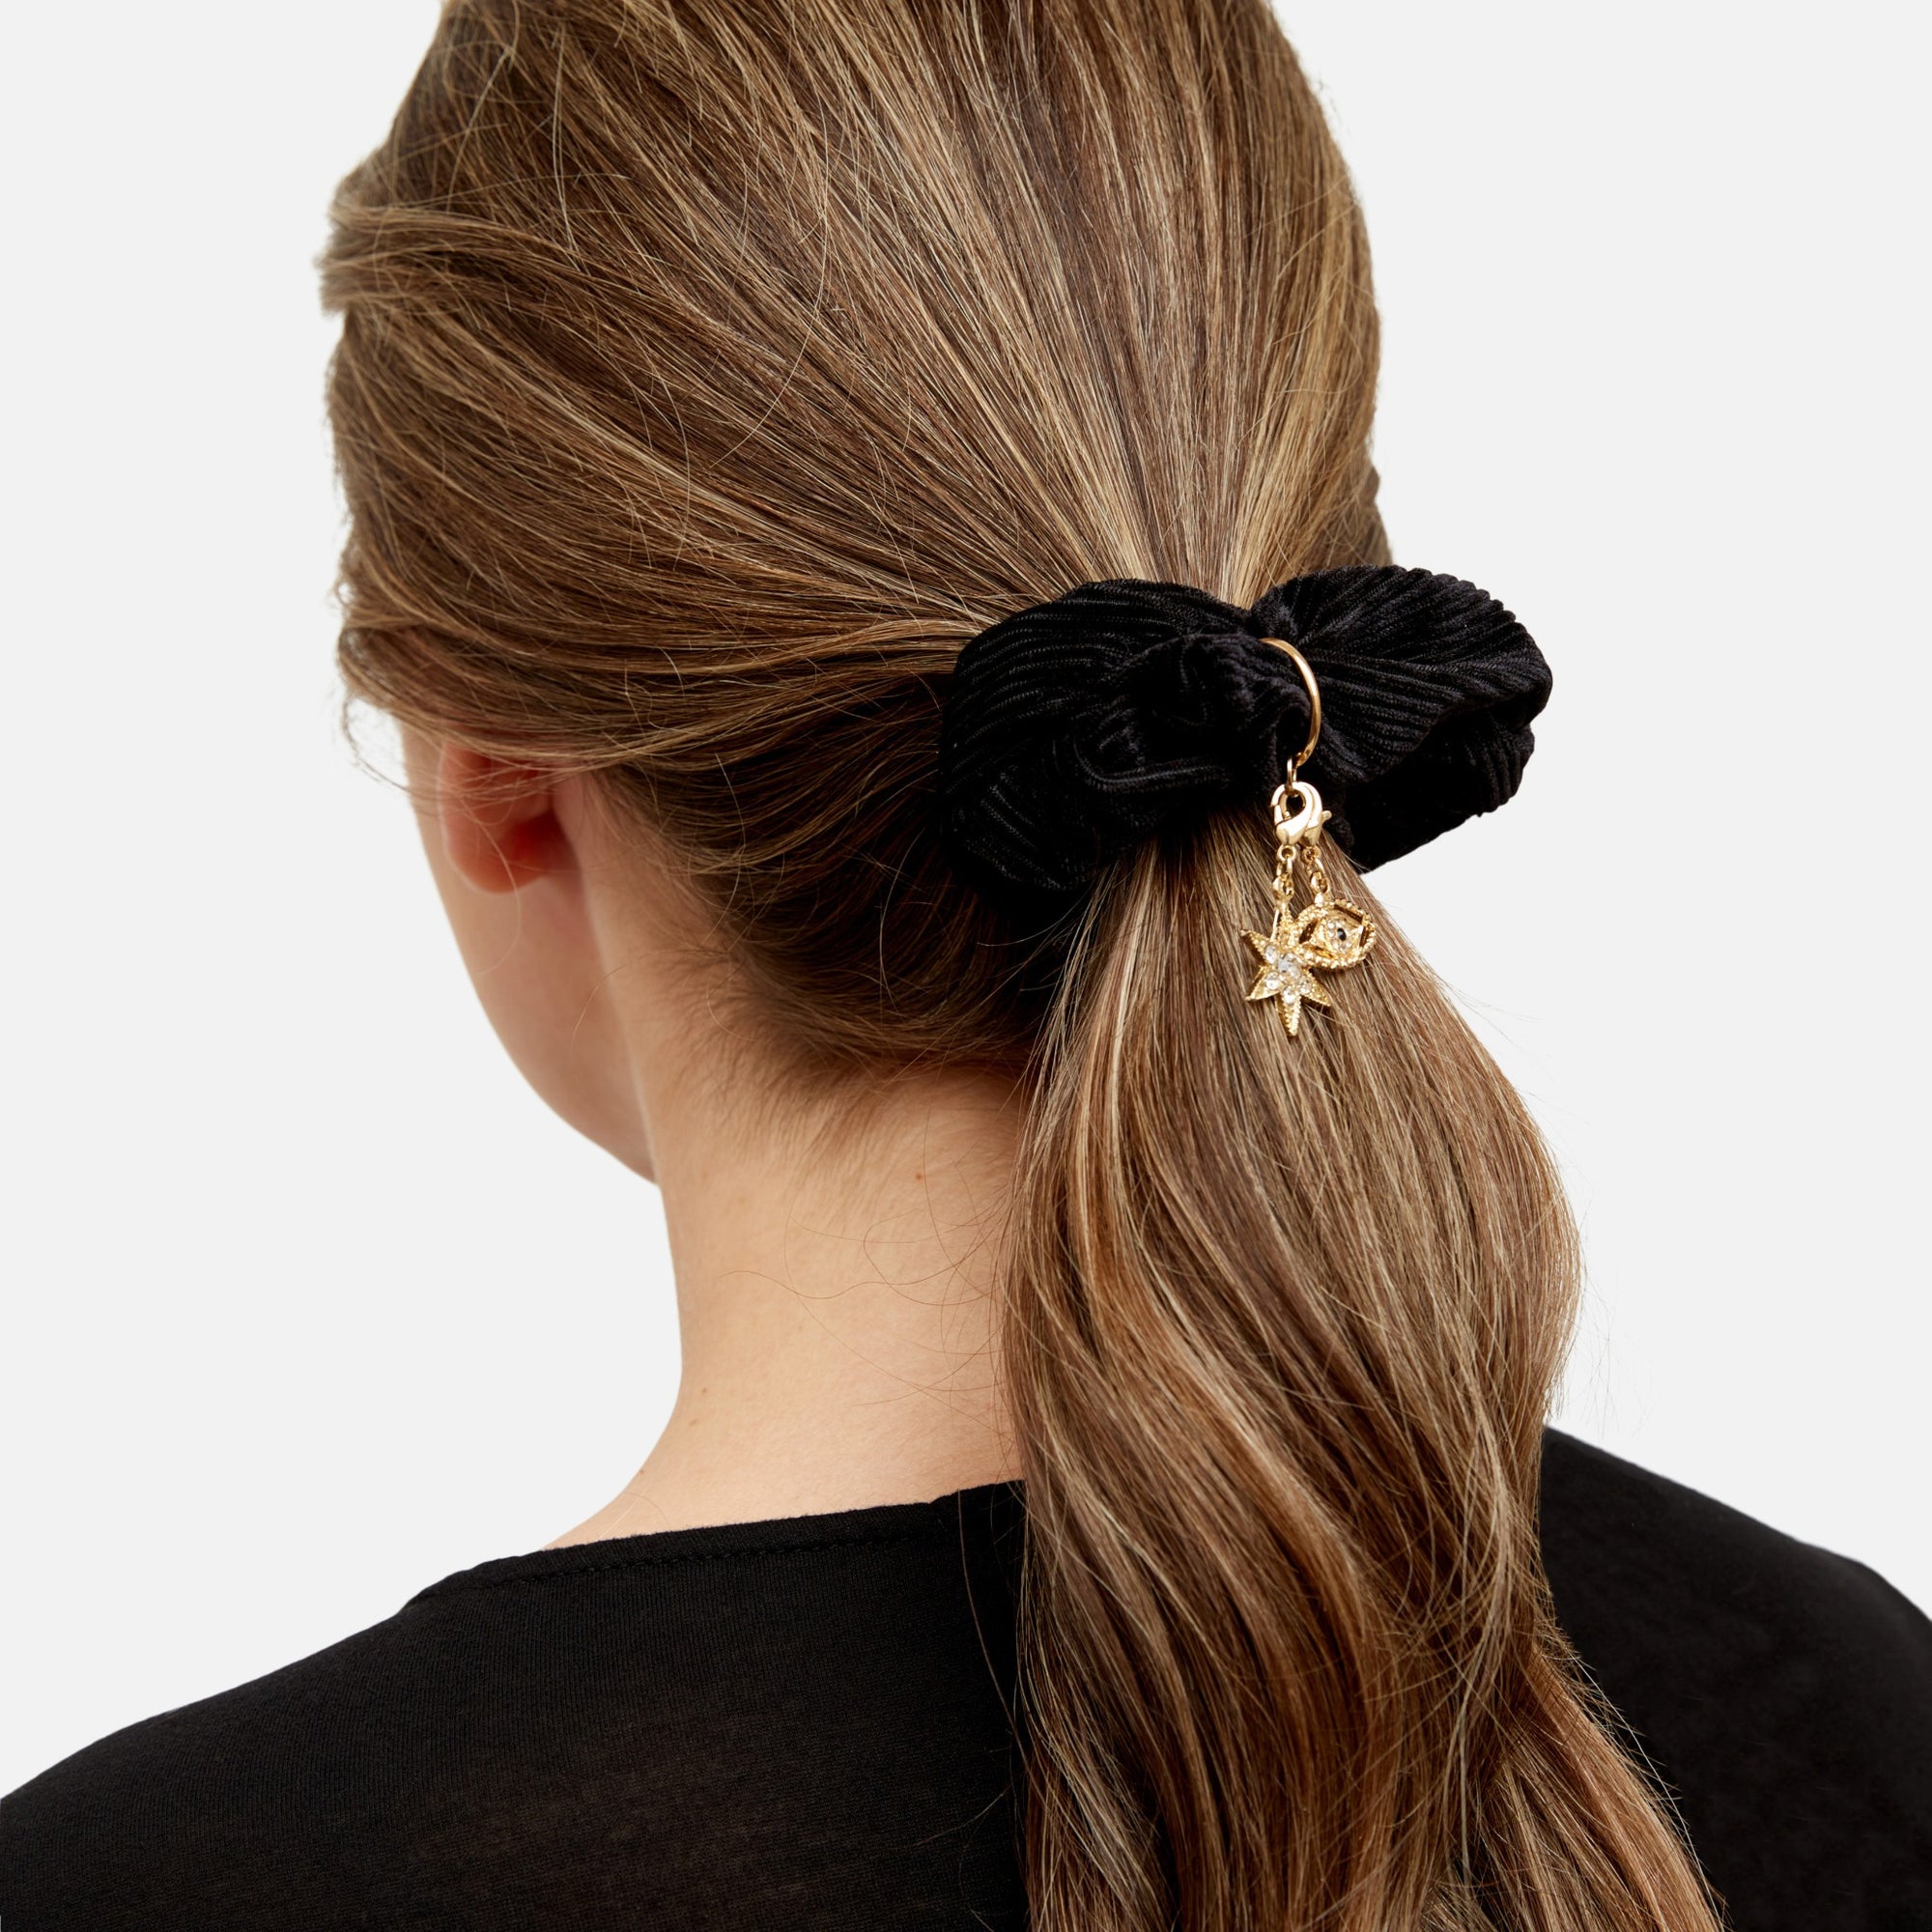 Black velvet scrunchie with removable charms